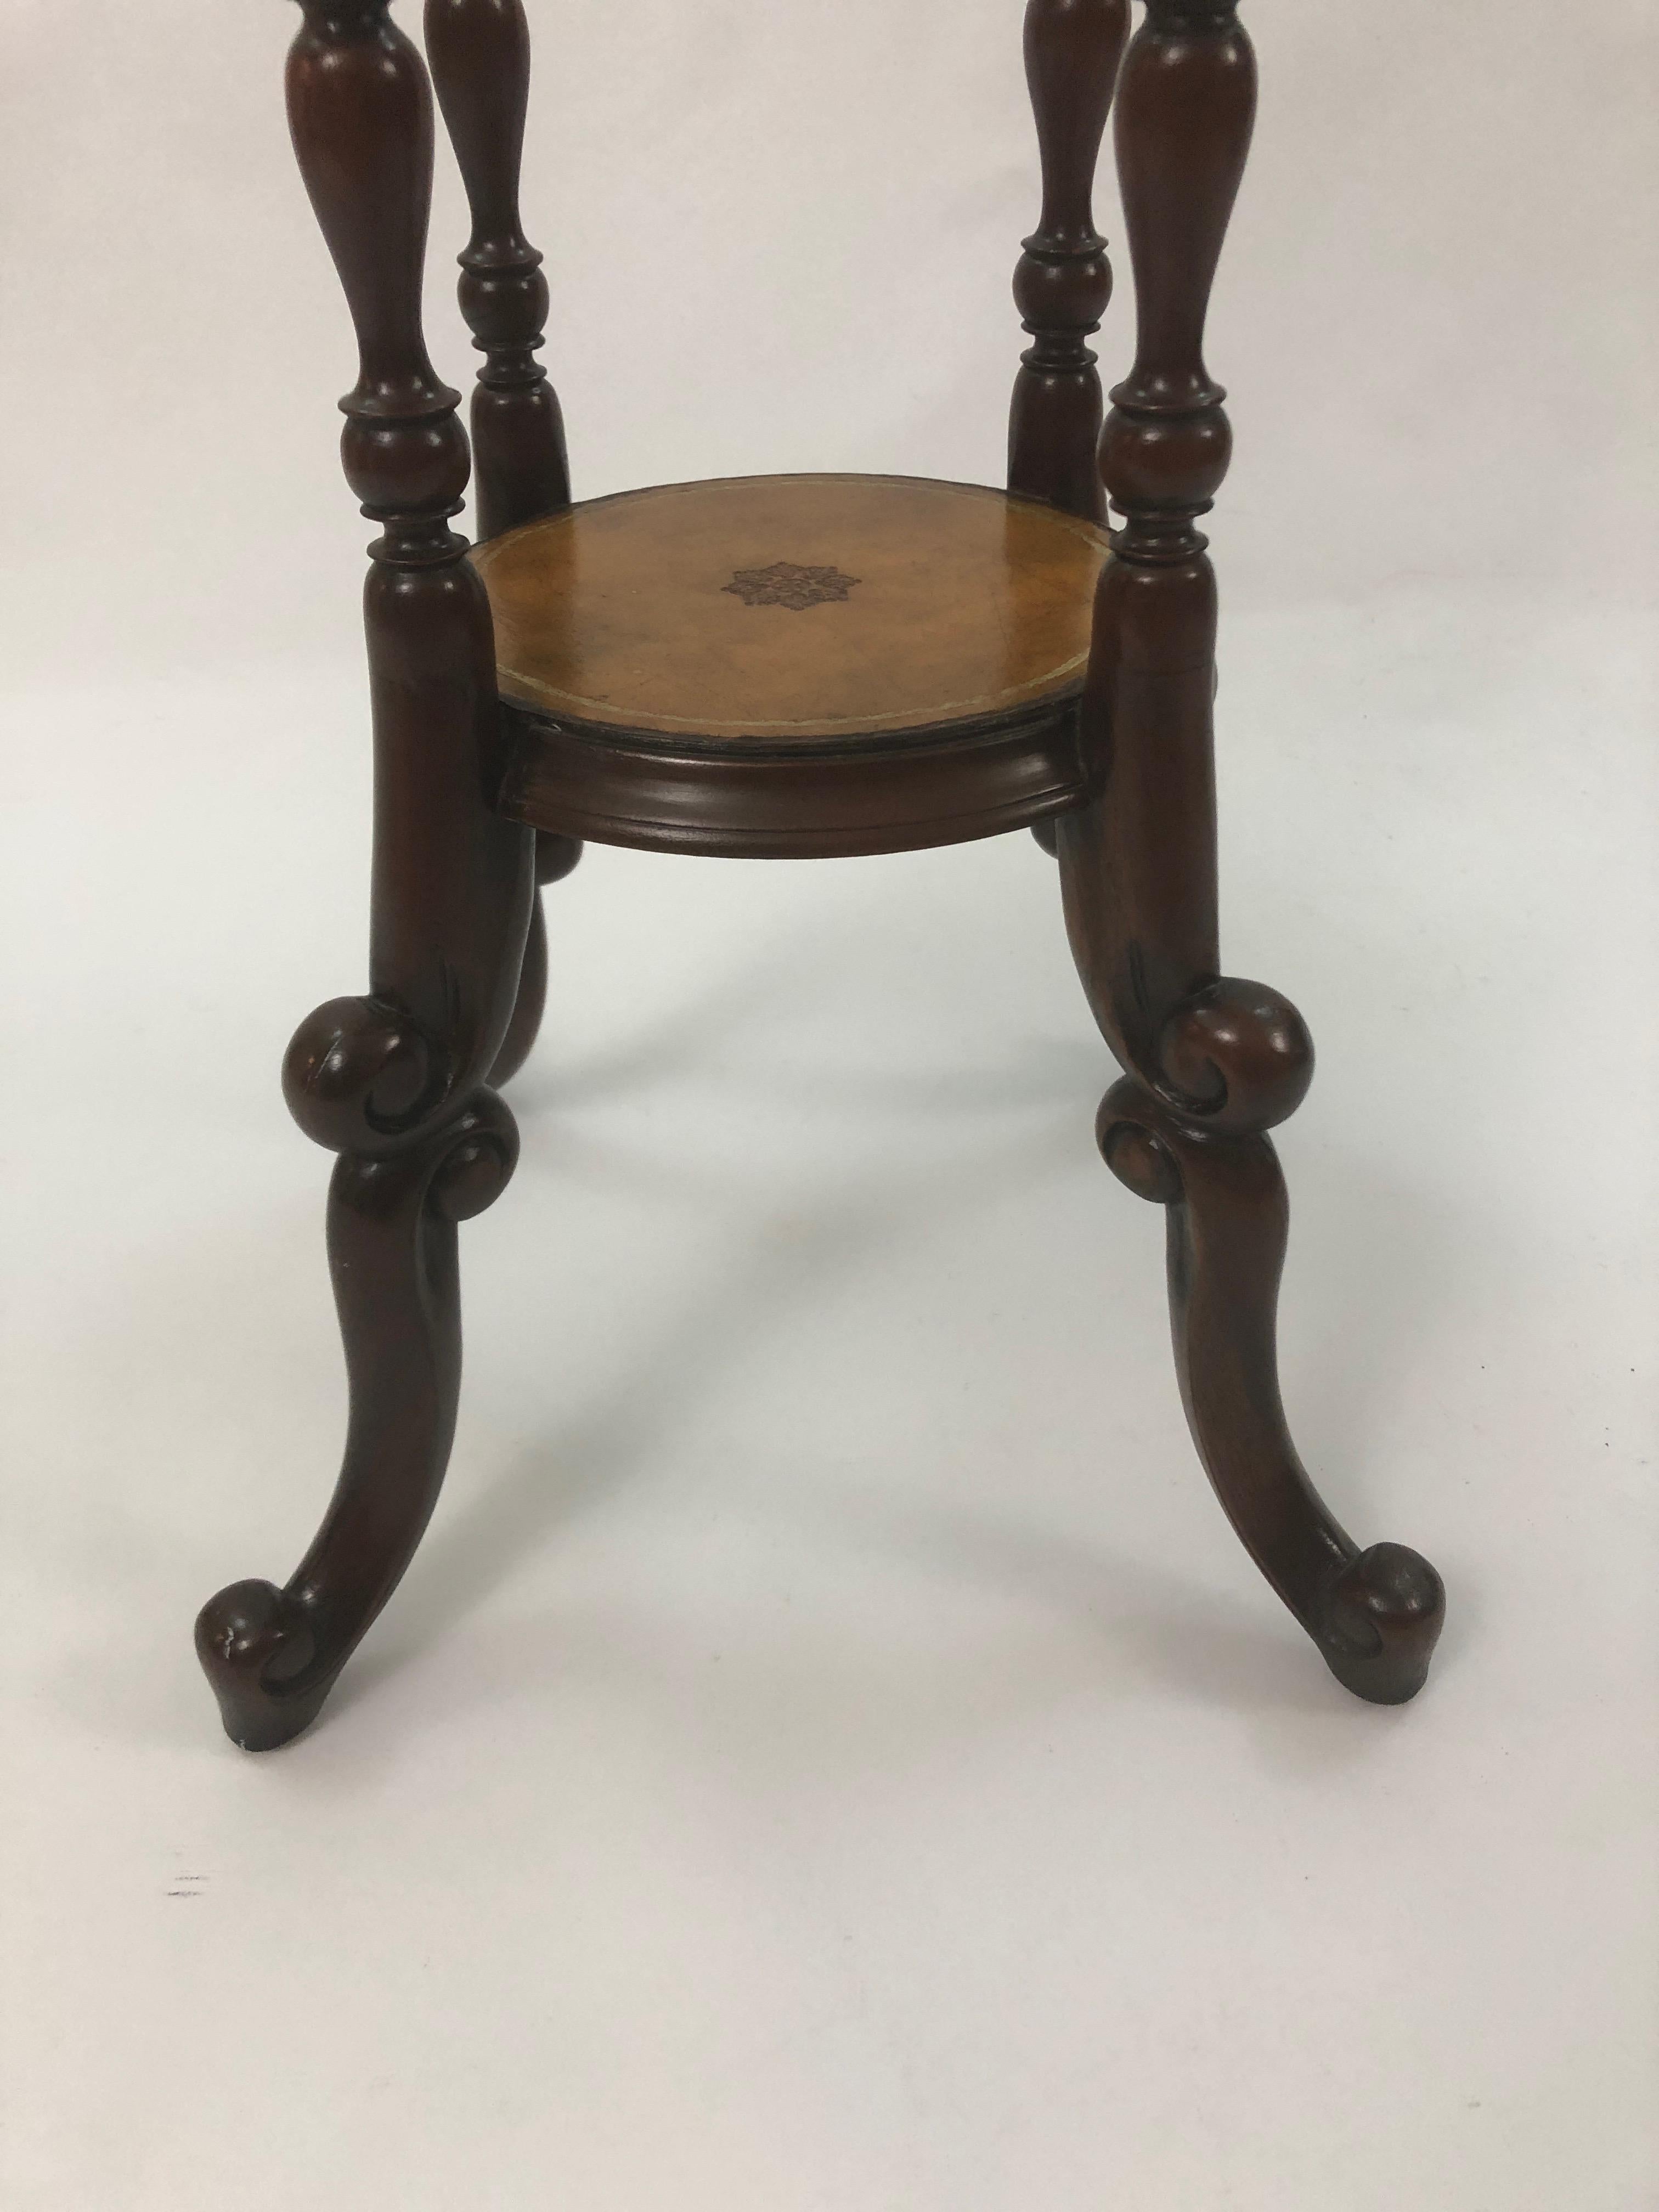 A handsome tall mahogany stand having barley twist structure and tooled leather on both circular surfaces with central decorative emblem indicative of Maitland Smith creations.